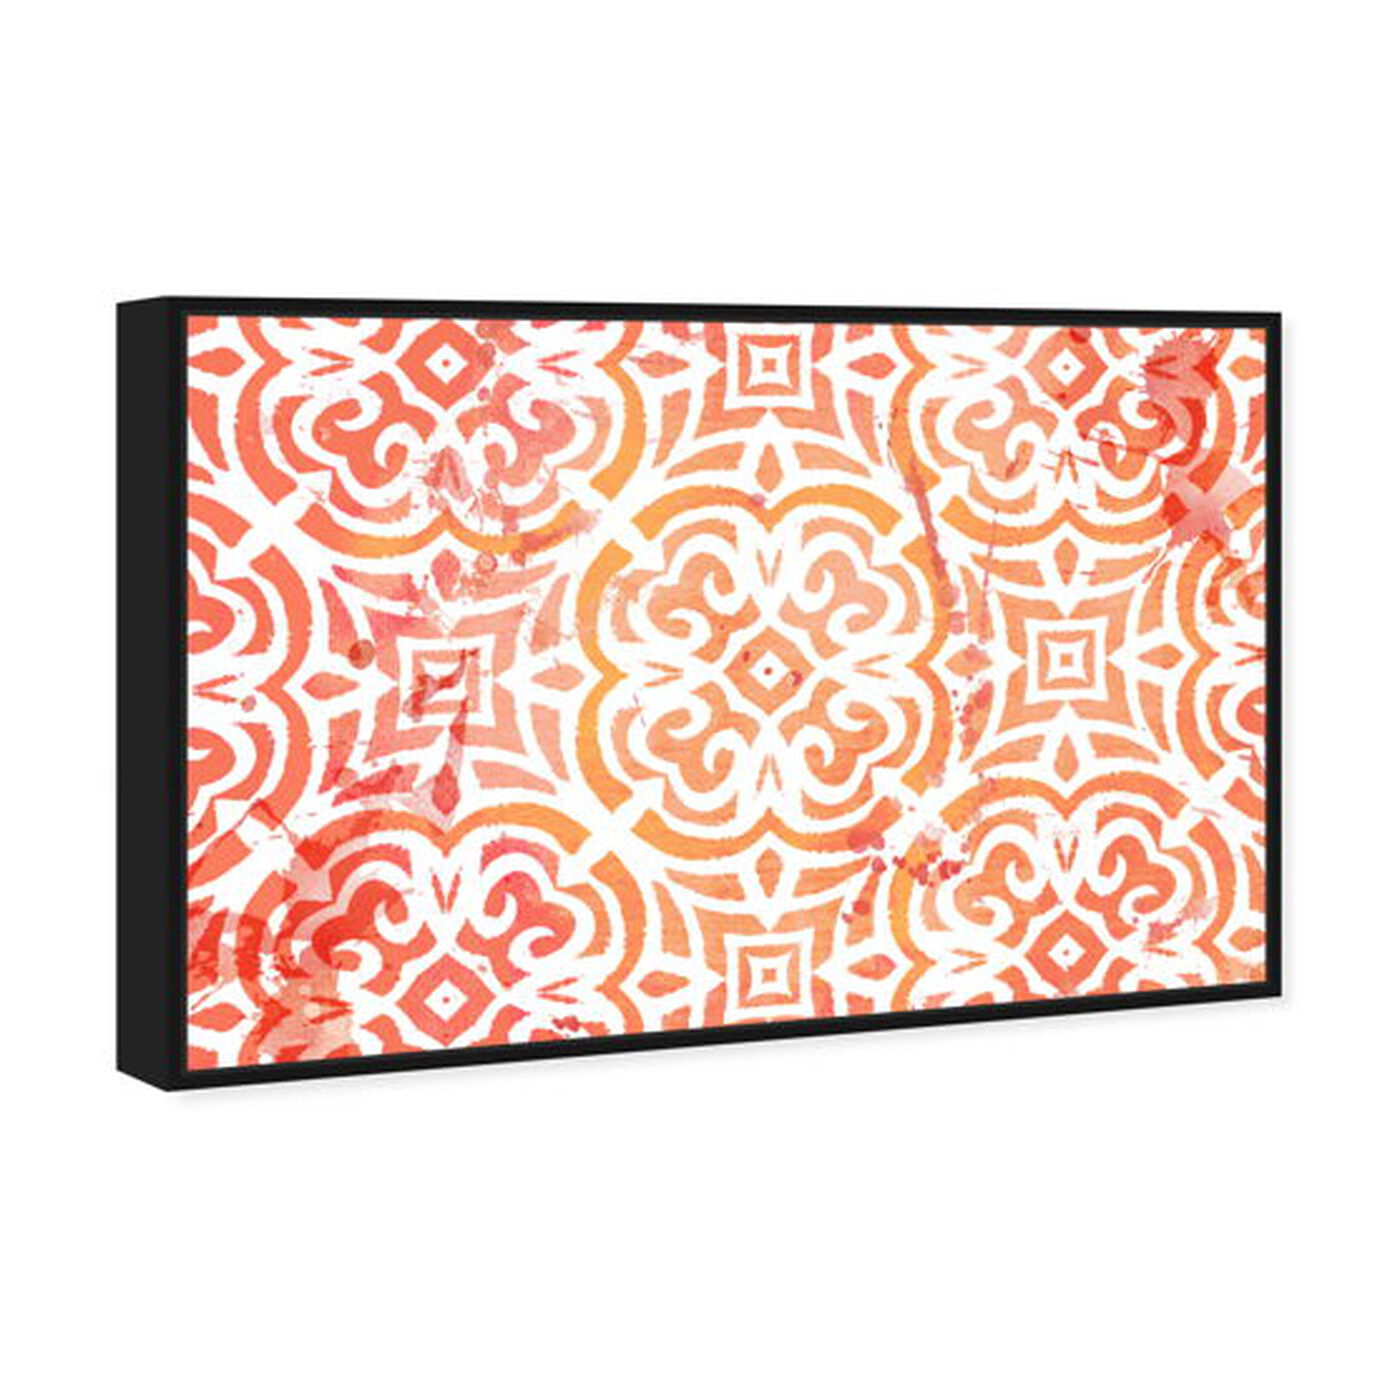 Angled view of Peachy Afternoon featuring abstract and patterns art.